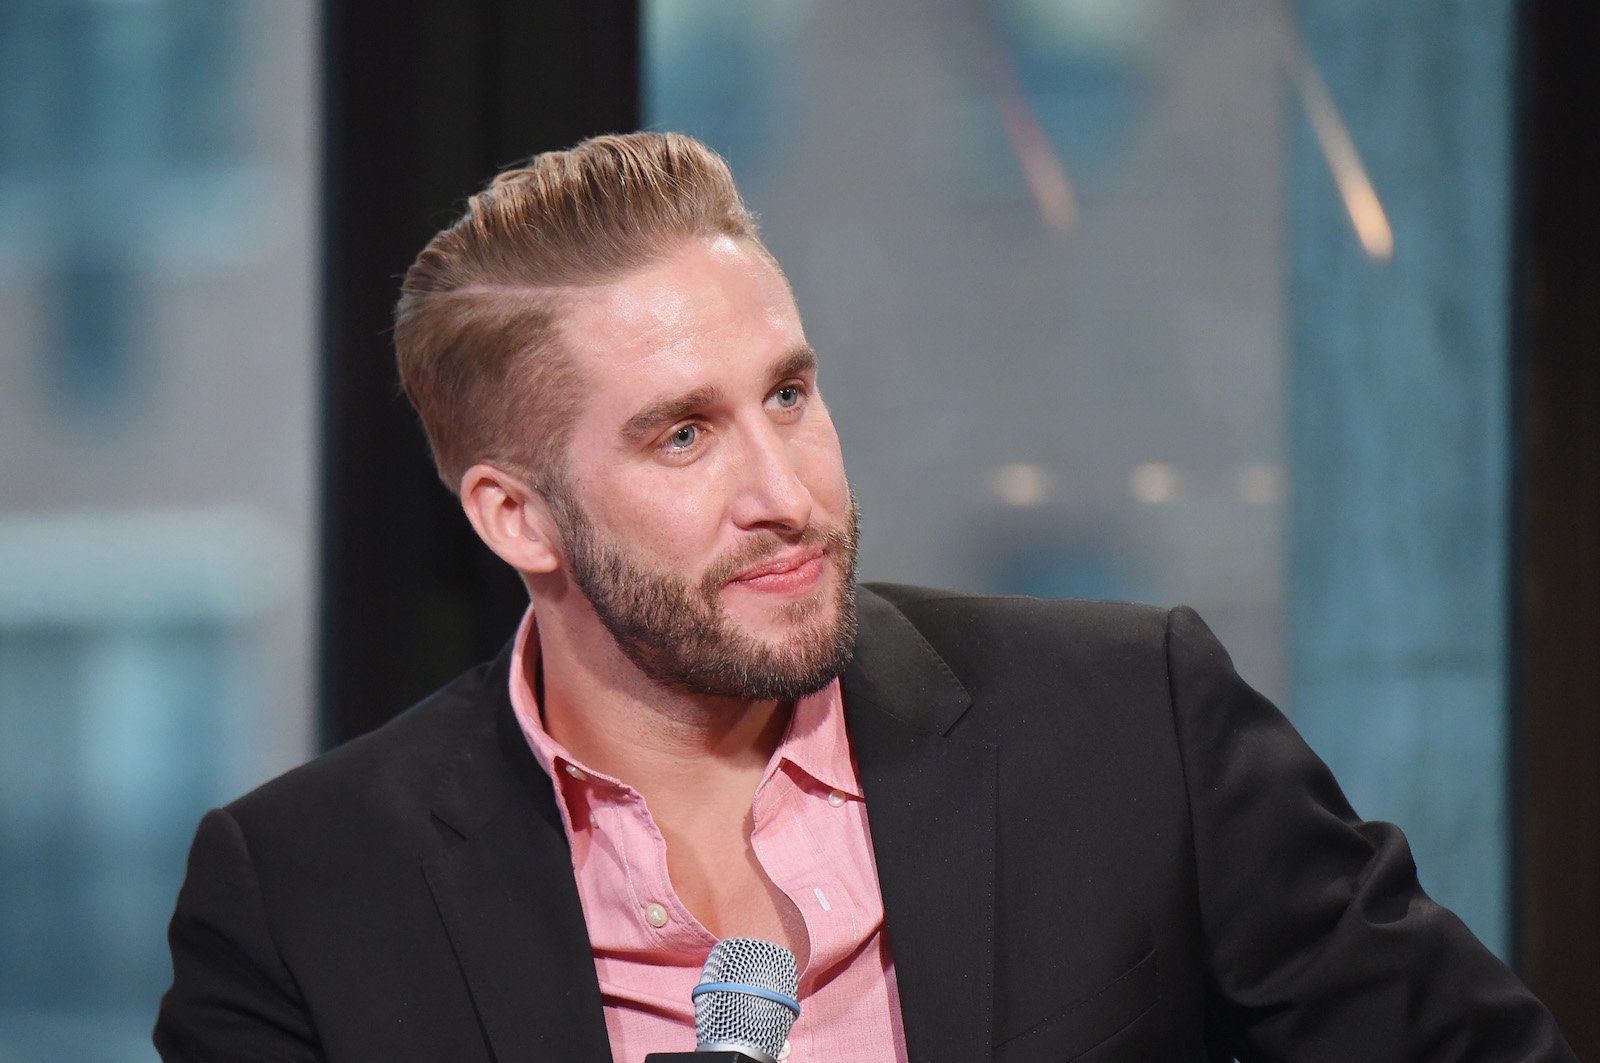 Shawn Booth from 'The Bachelorette' attends the AOL BUILD Speaker Series in 2015